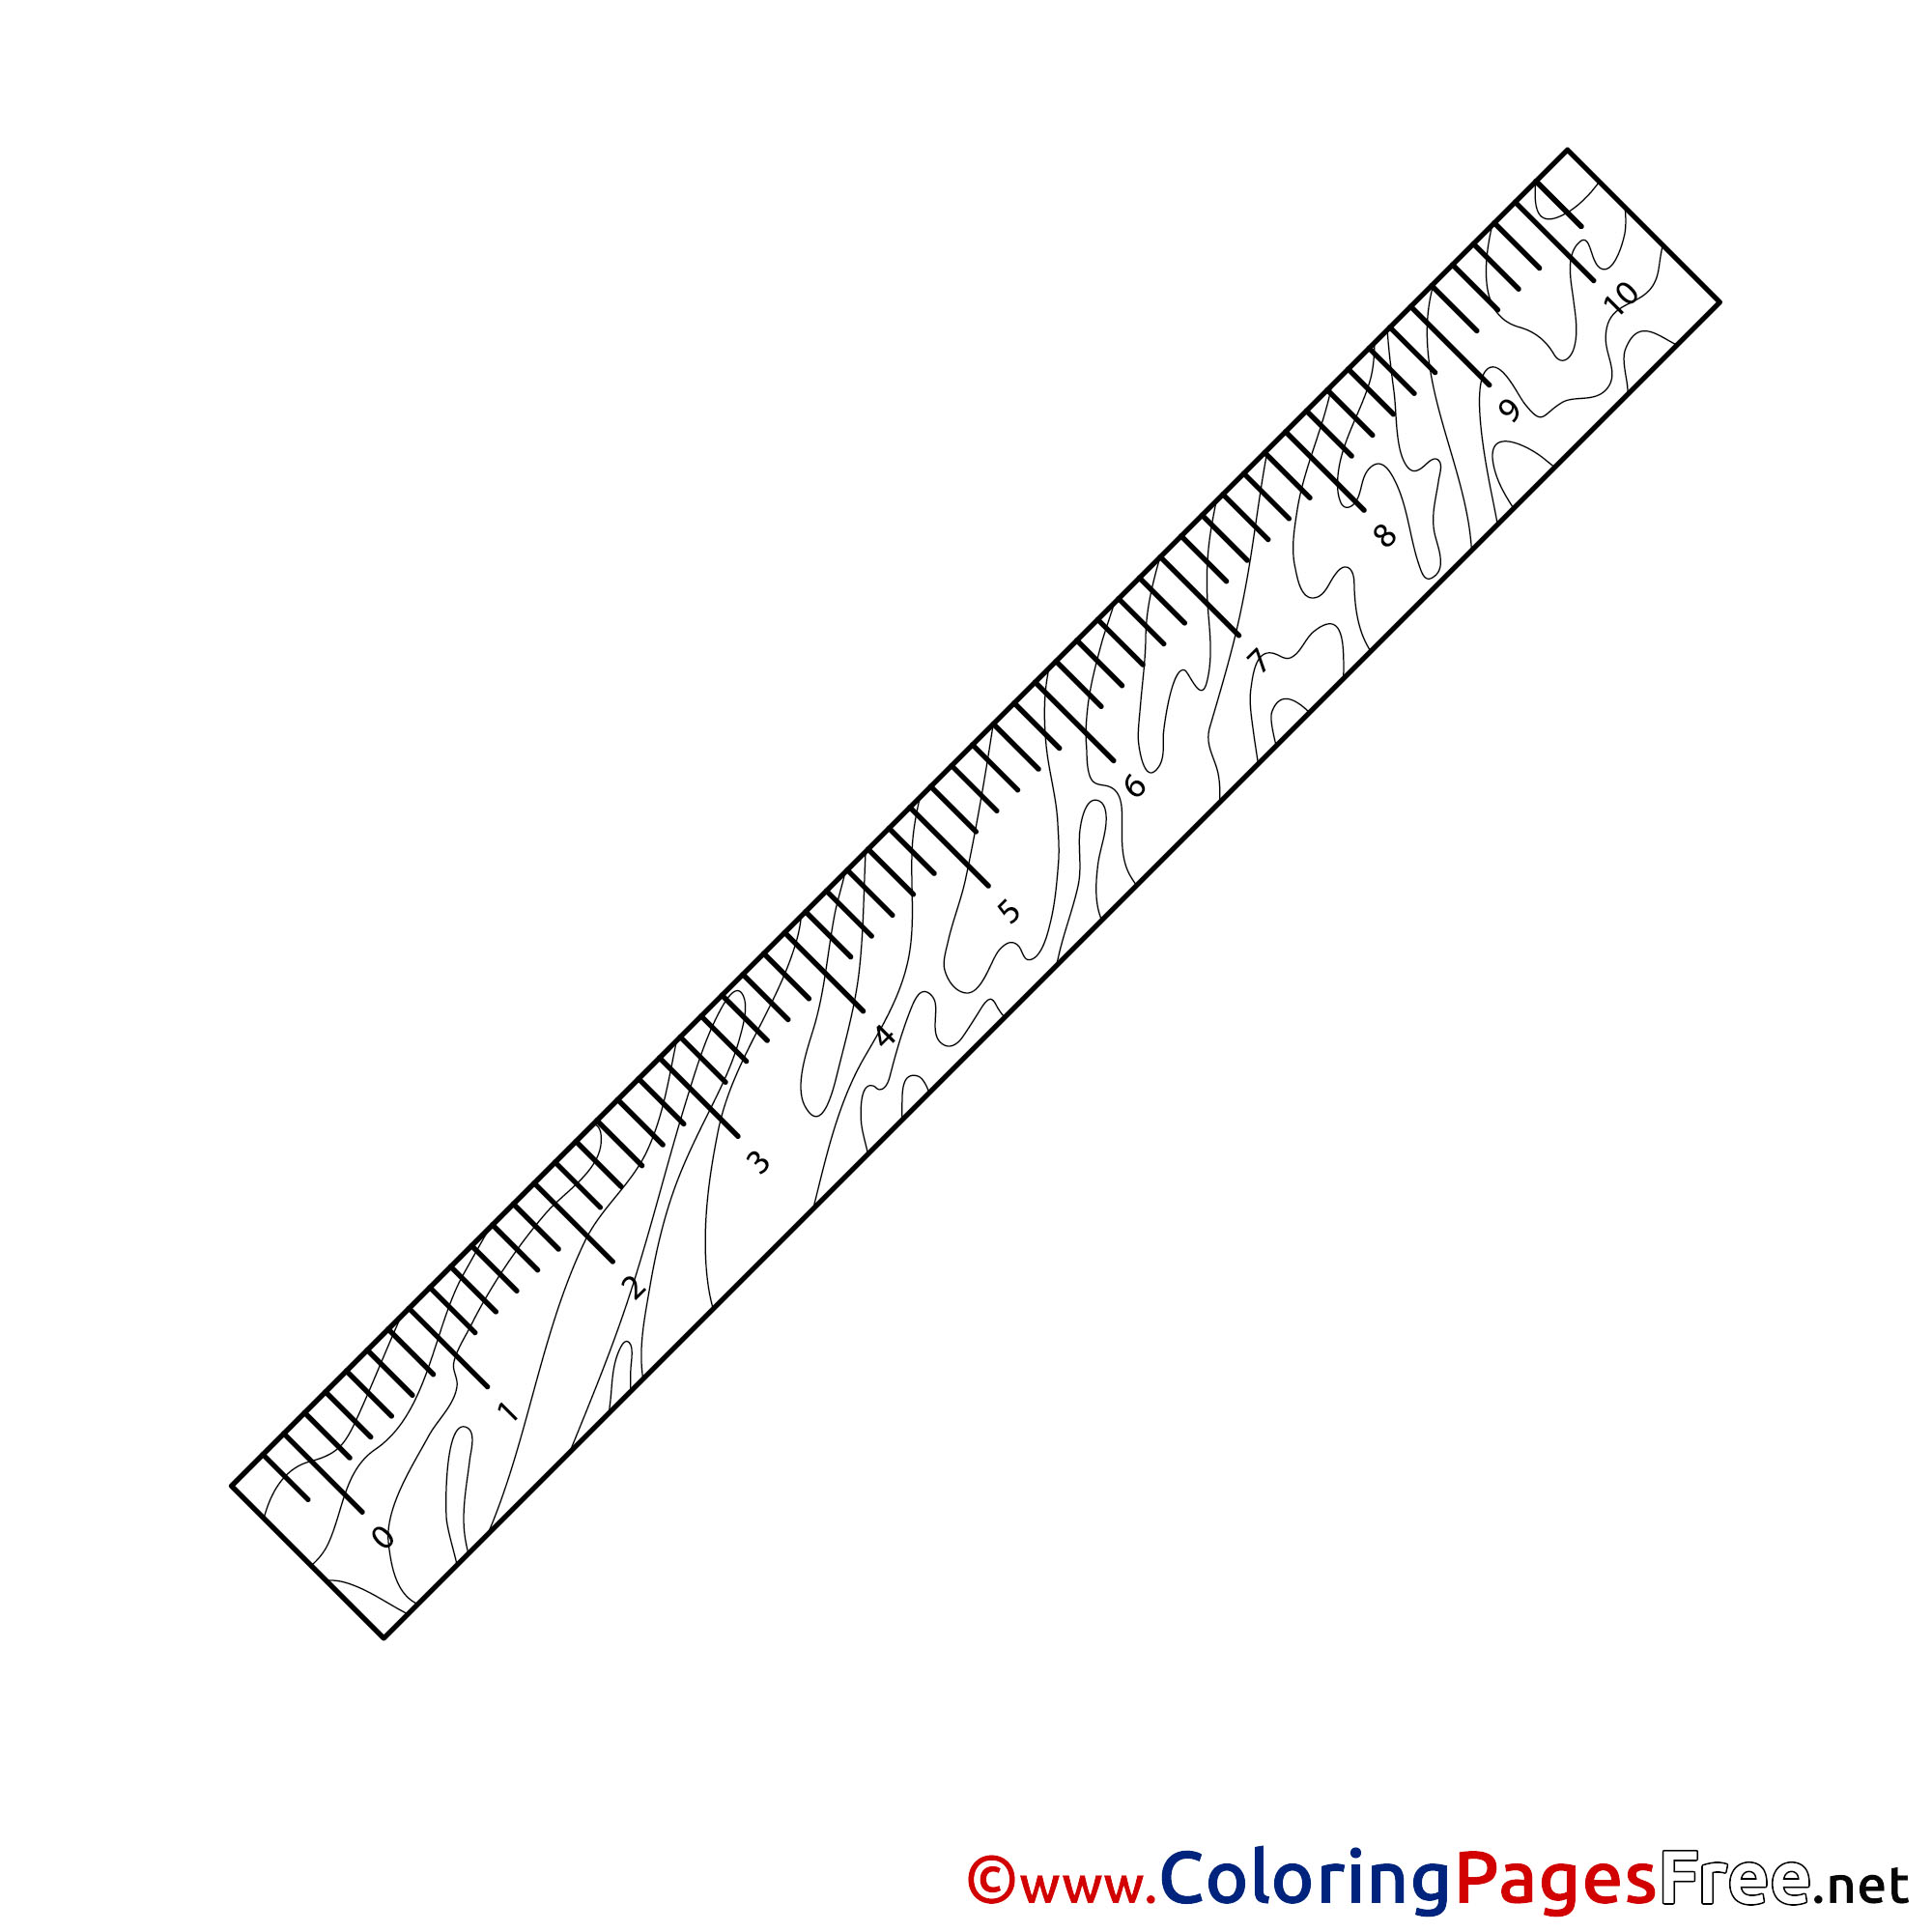 Ruler for Kids printable School Colouring Page